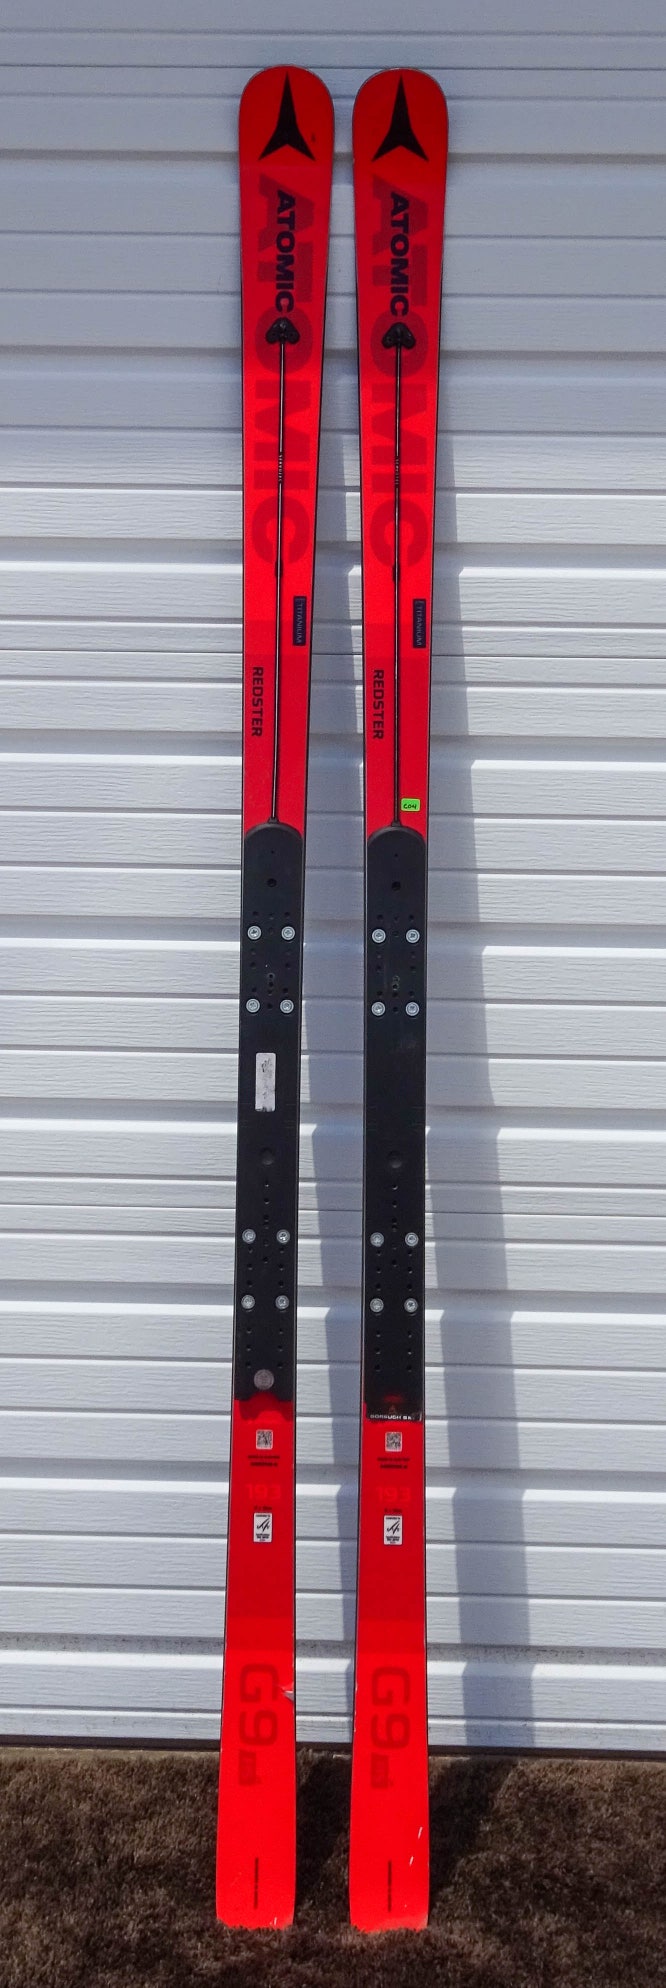 2020 Atomic FIS Redster Giant Slalom w/Atomic Race Plates Size-193cm R-30Meters